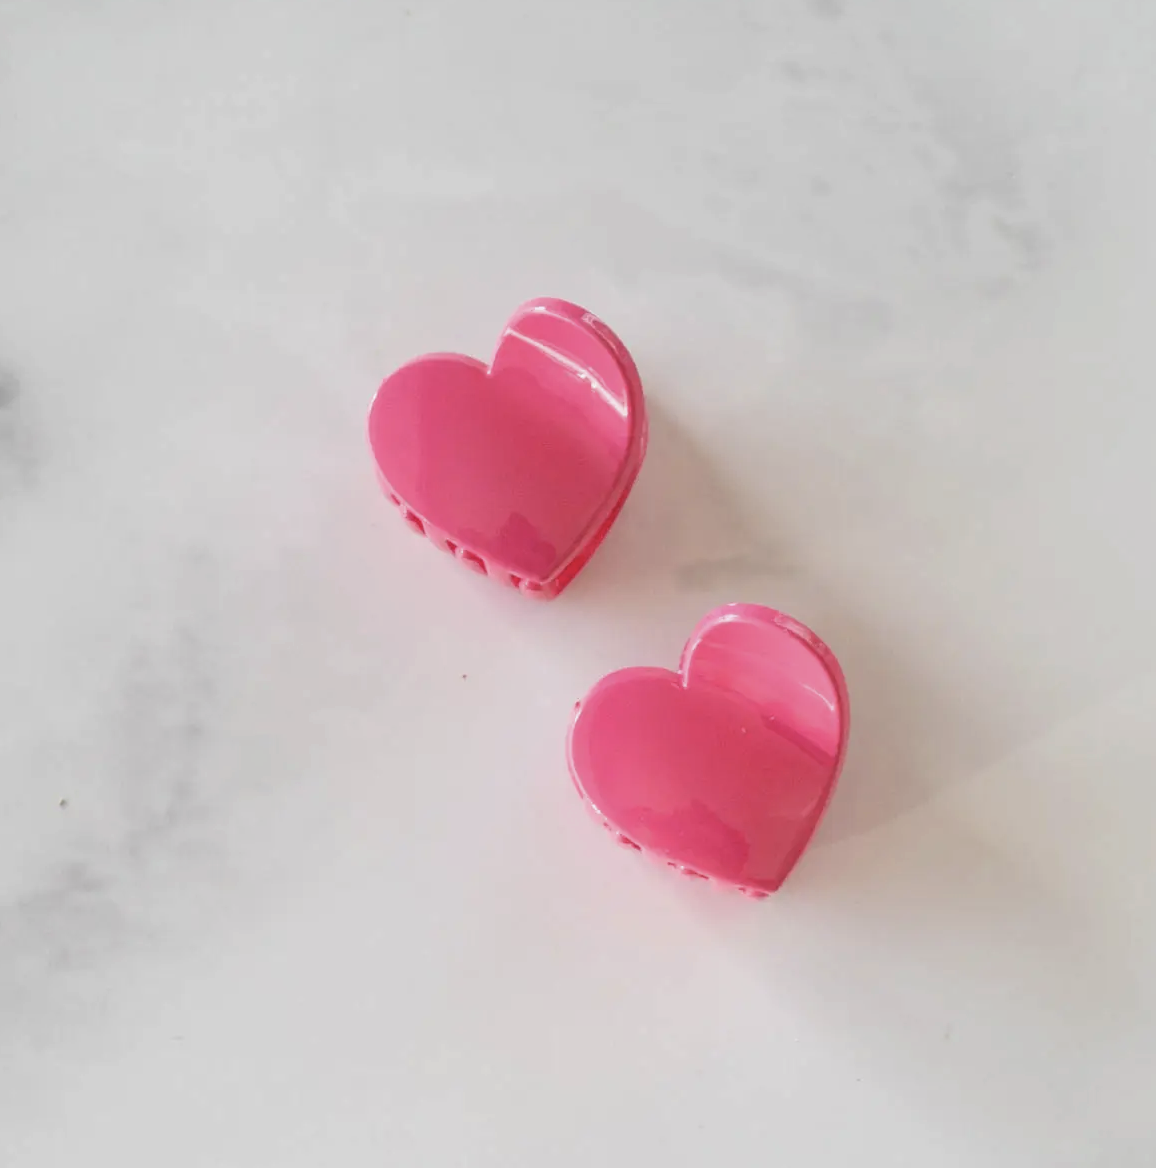 Candy Hearts Clips